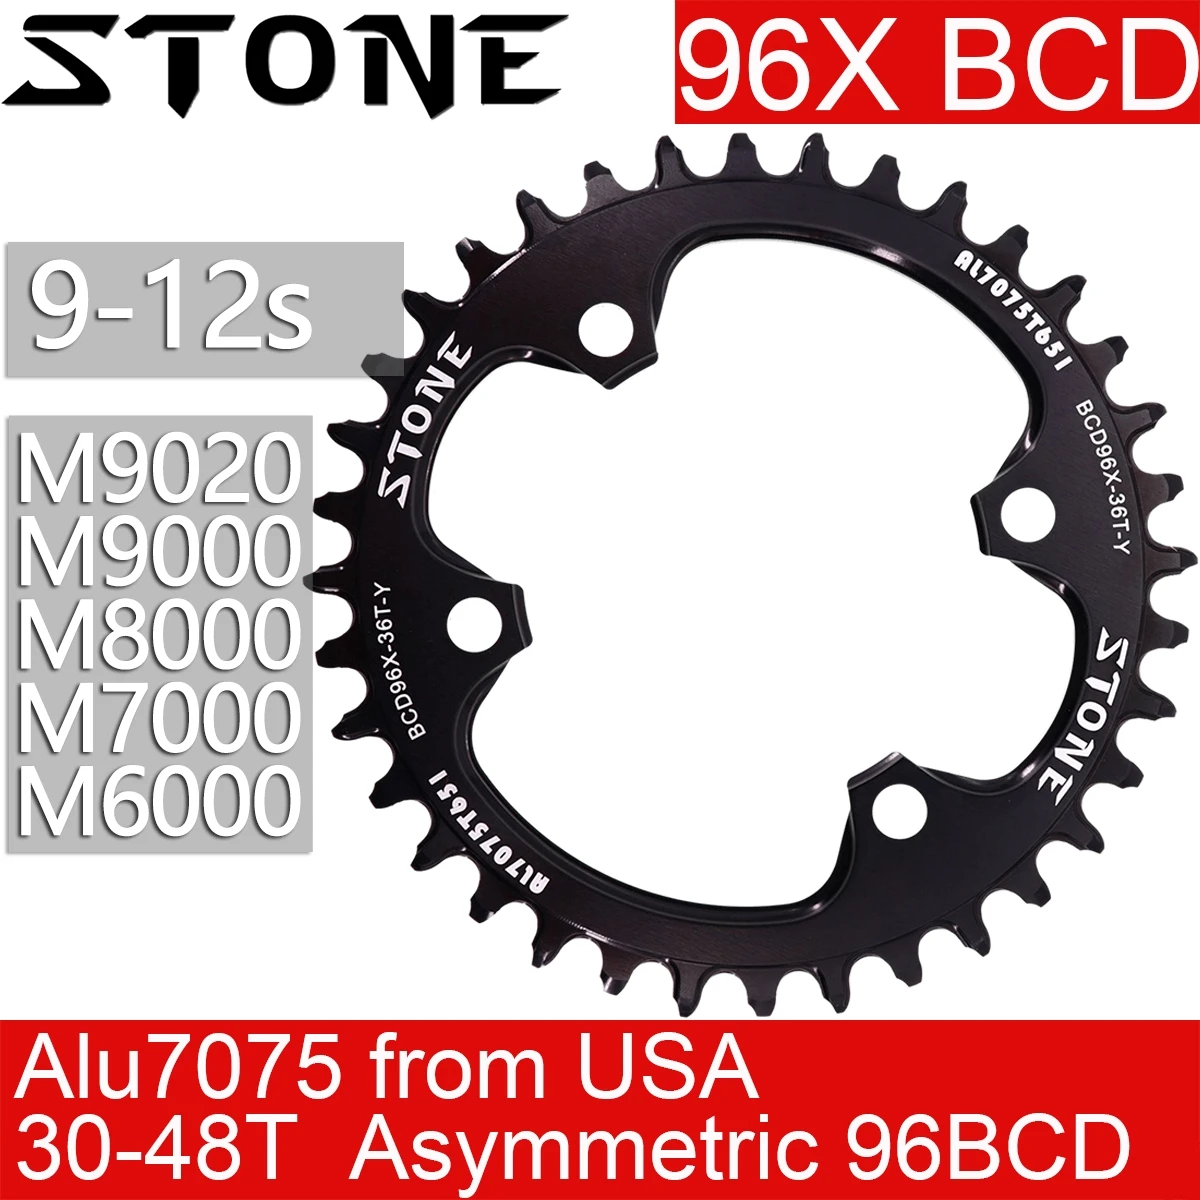 

Stone 96 BCD Round Chainring for Shimano M7000 m8000 m9000 30t 32t 34t 36 38 40 44 46 48T MTB Bike Chainwheel Tooth Plate 96bcd